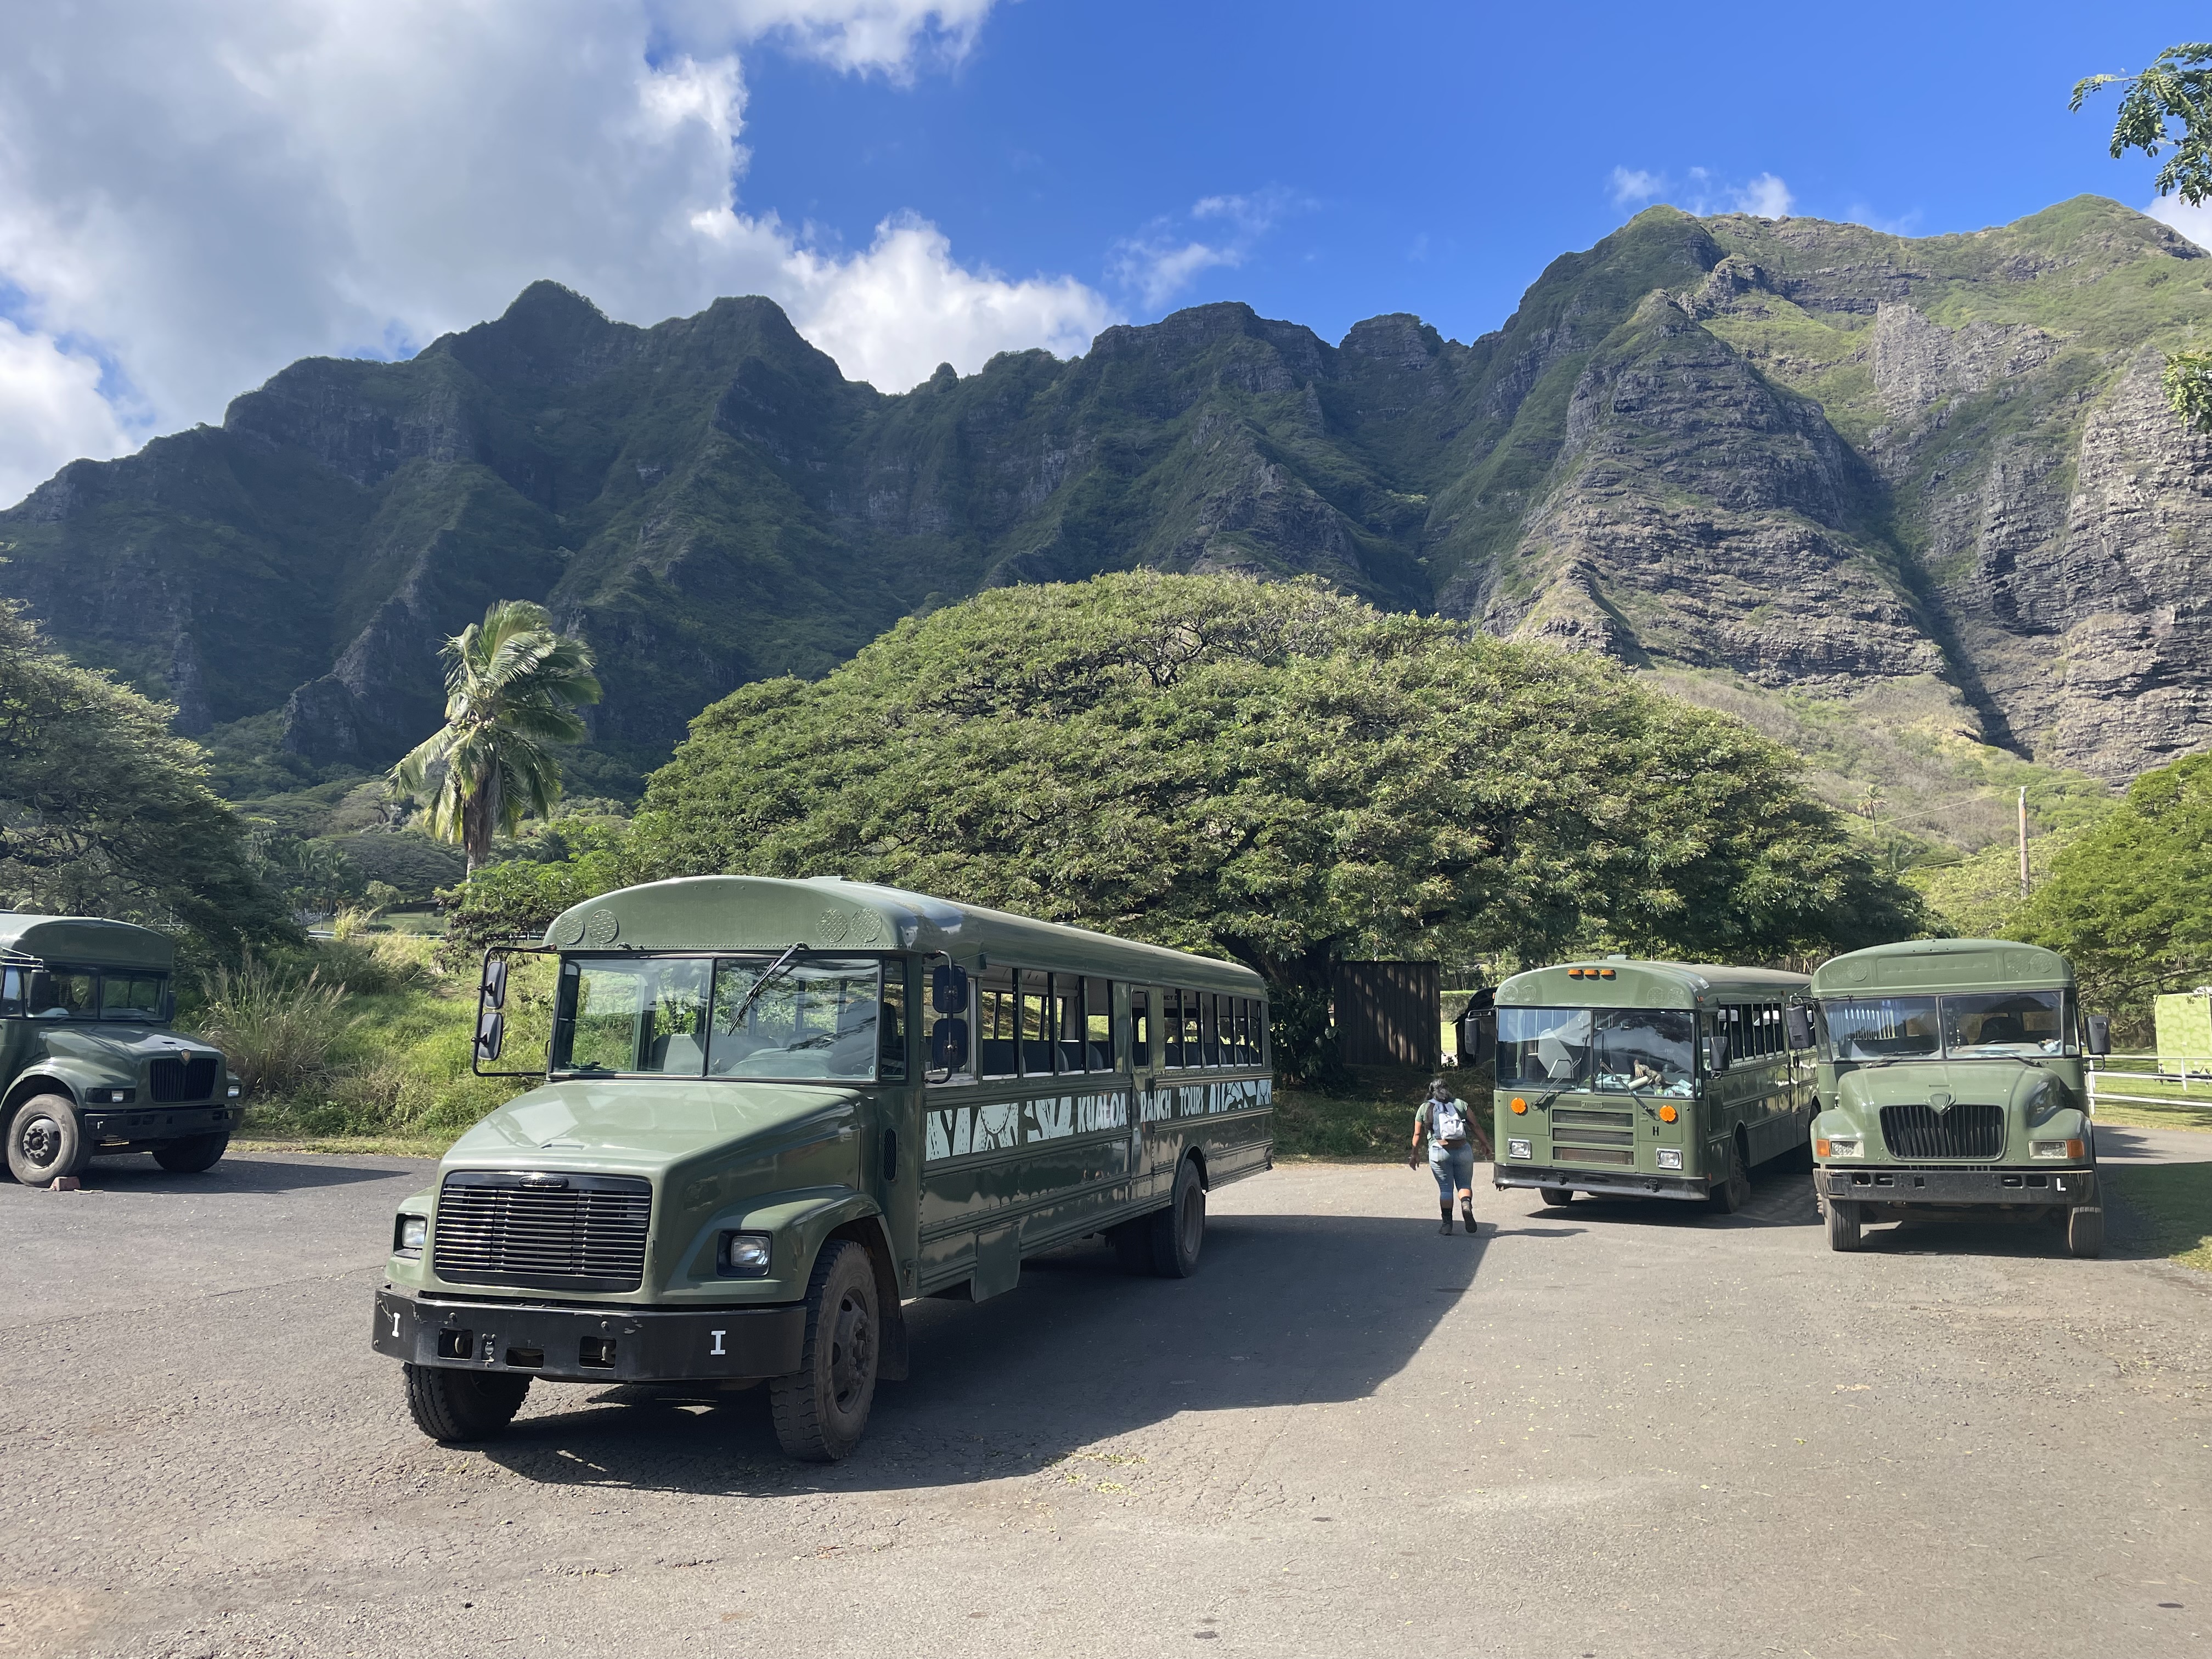 Busses for the Kualoa Ranch tours